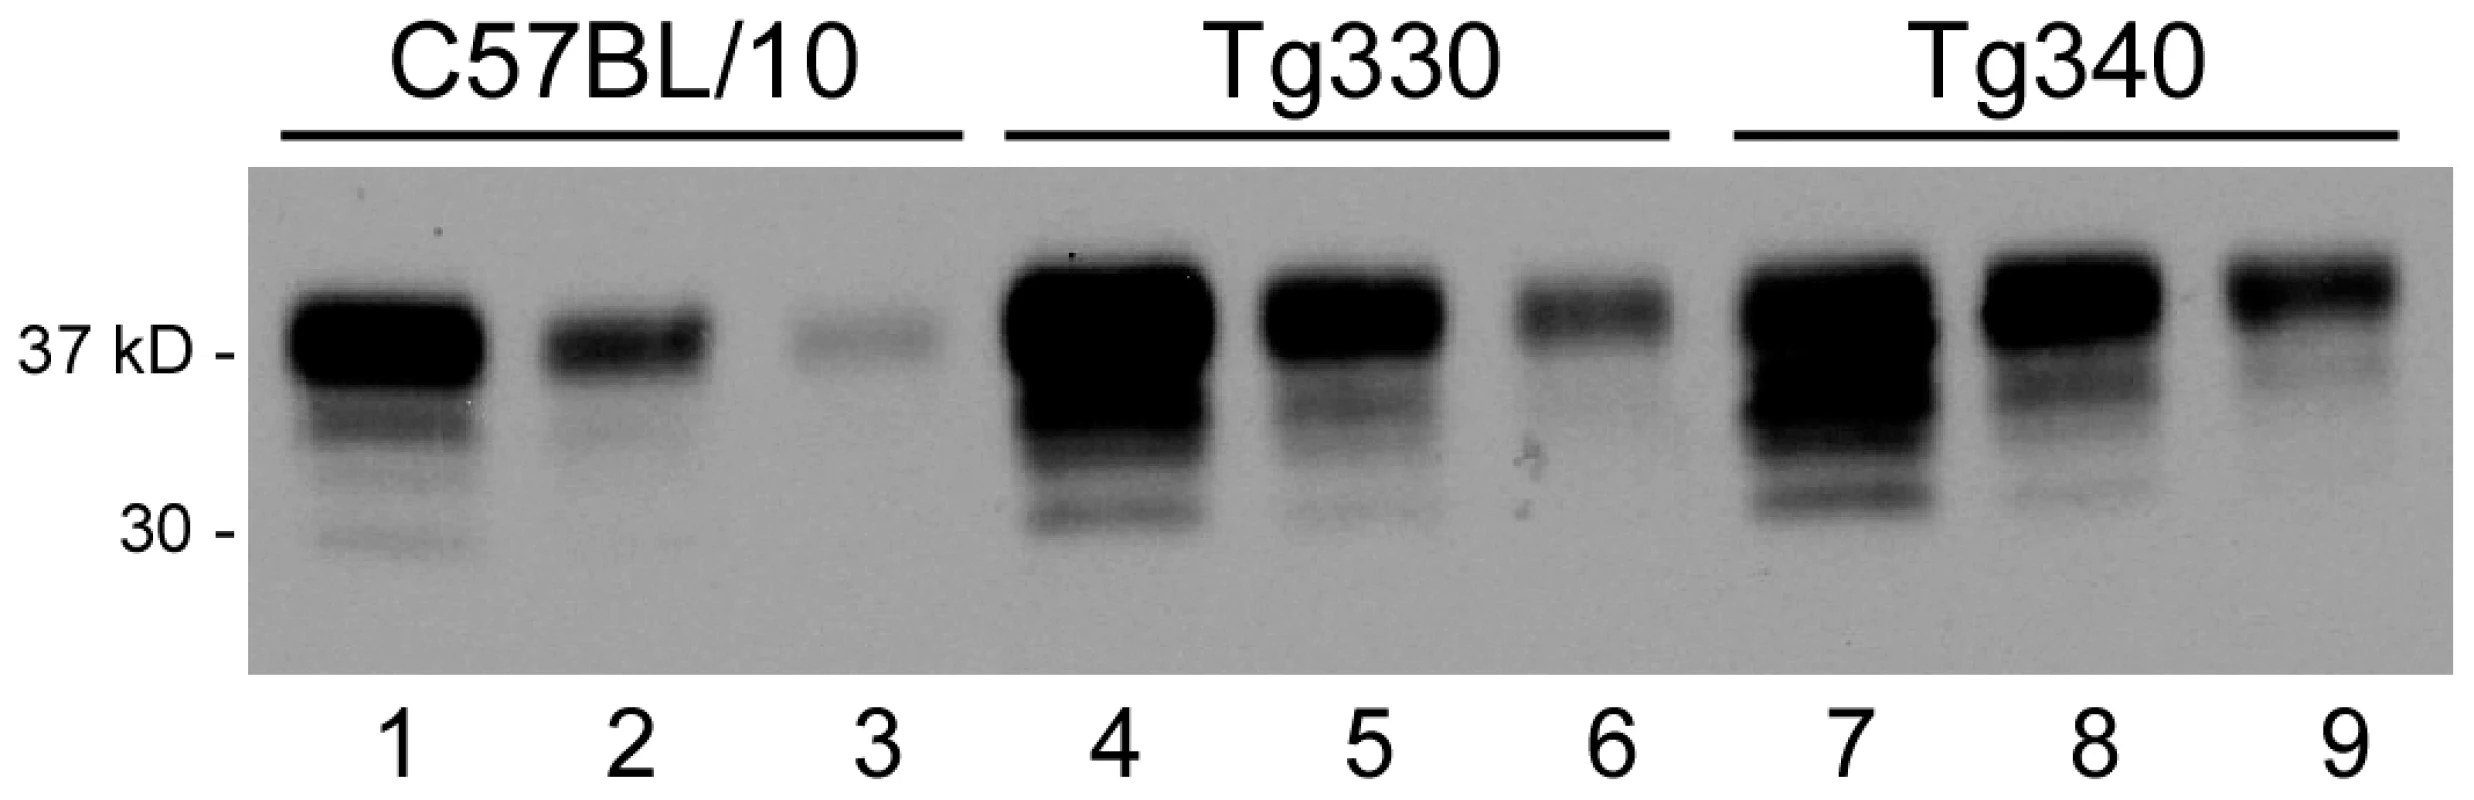 Immunoblot detection of PrPsen from C57BL/10 and transgenic mice.